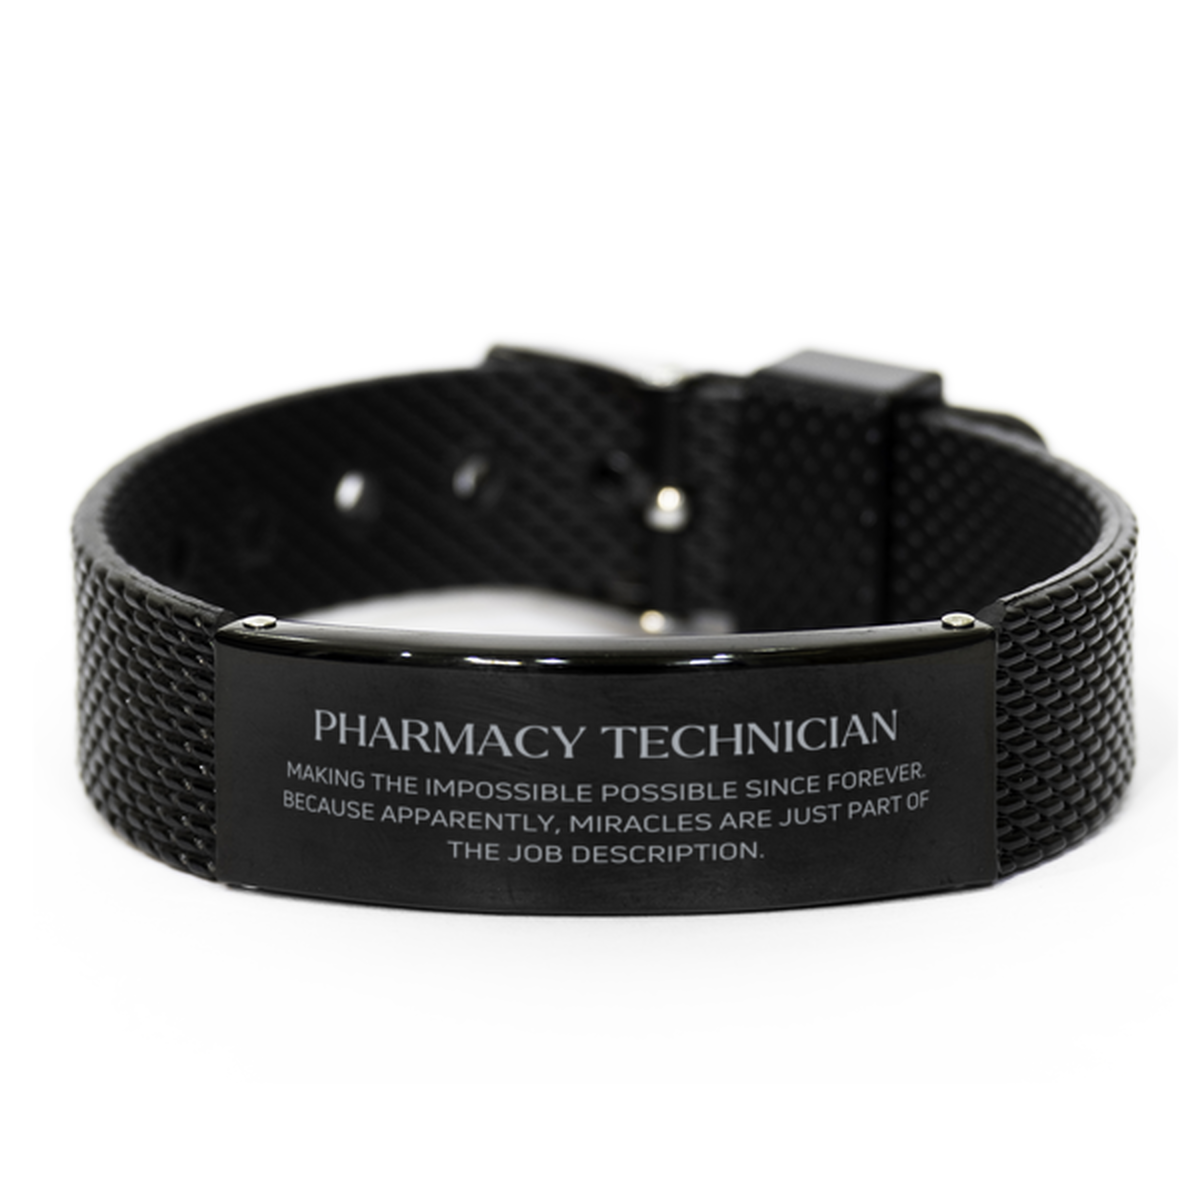 Funny Pharmacy Technician Gifts, Miracles are just part of the job description, Inspirational Birthday Black Shark Mesh Bracelet For Pharmacy Technician, Men, Women, Coworkers, Friends, Boss